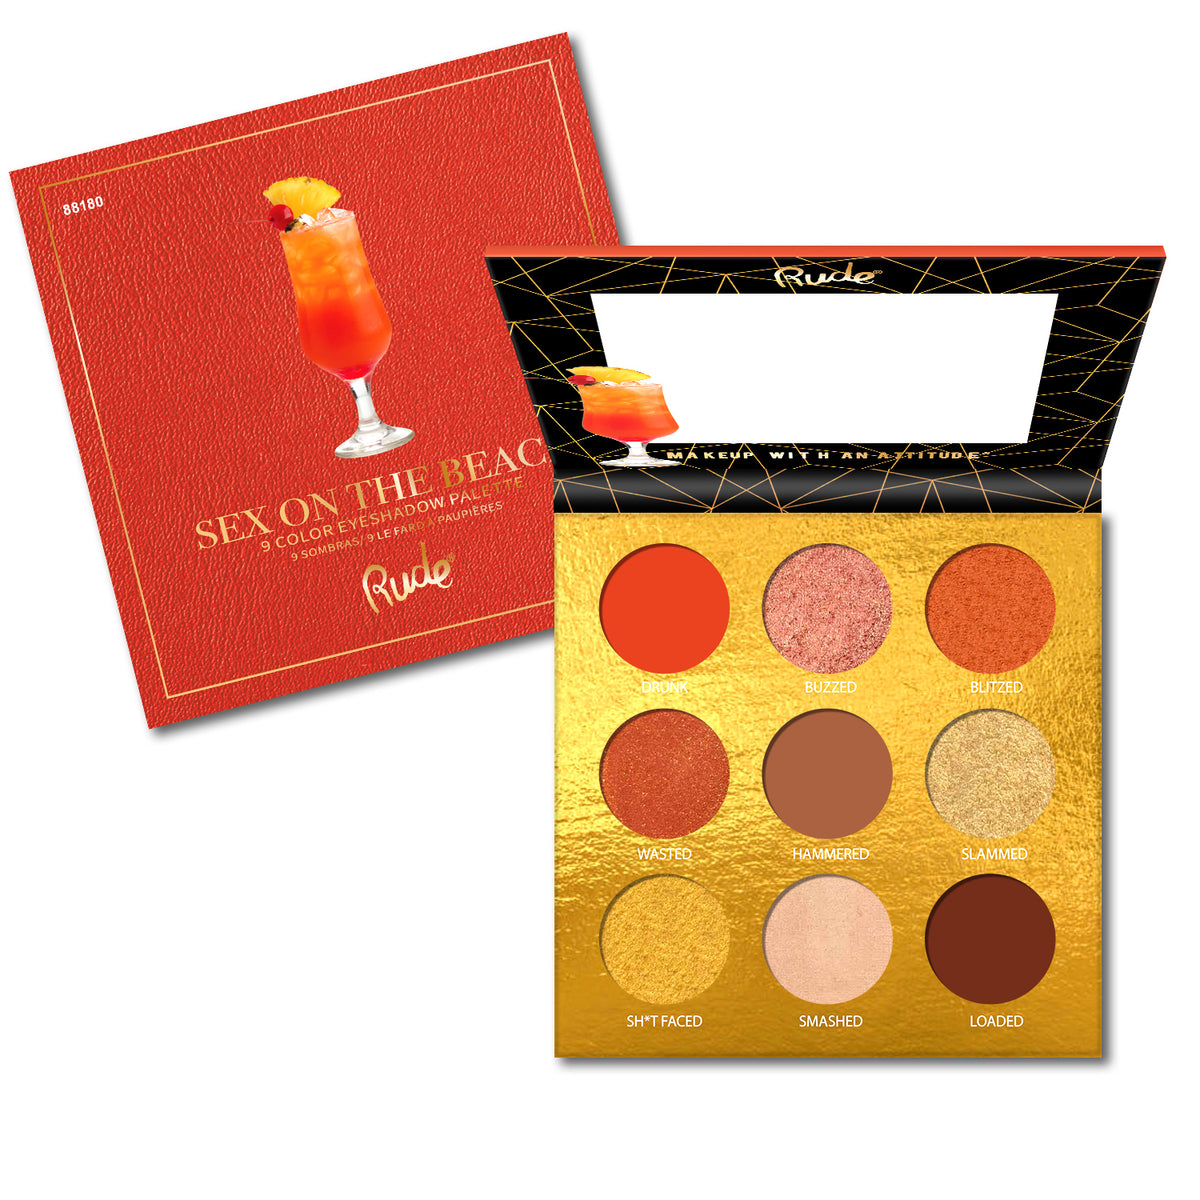 Cocktail Party 9 Color Vegan Eyeshadow Palette - Sex on The Beach